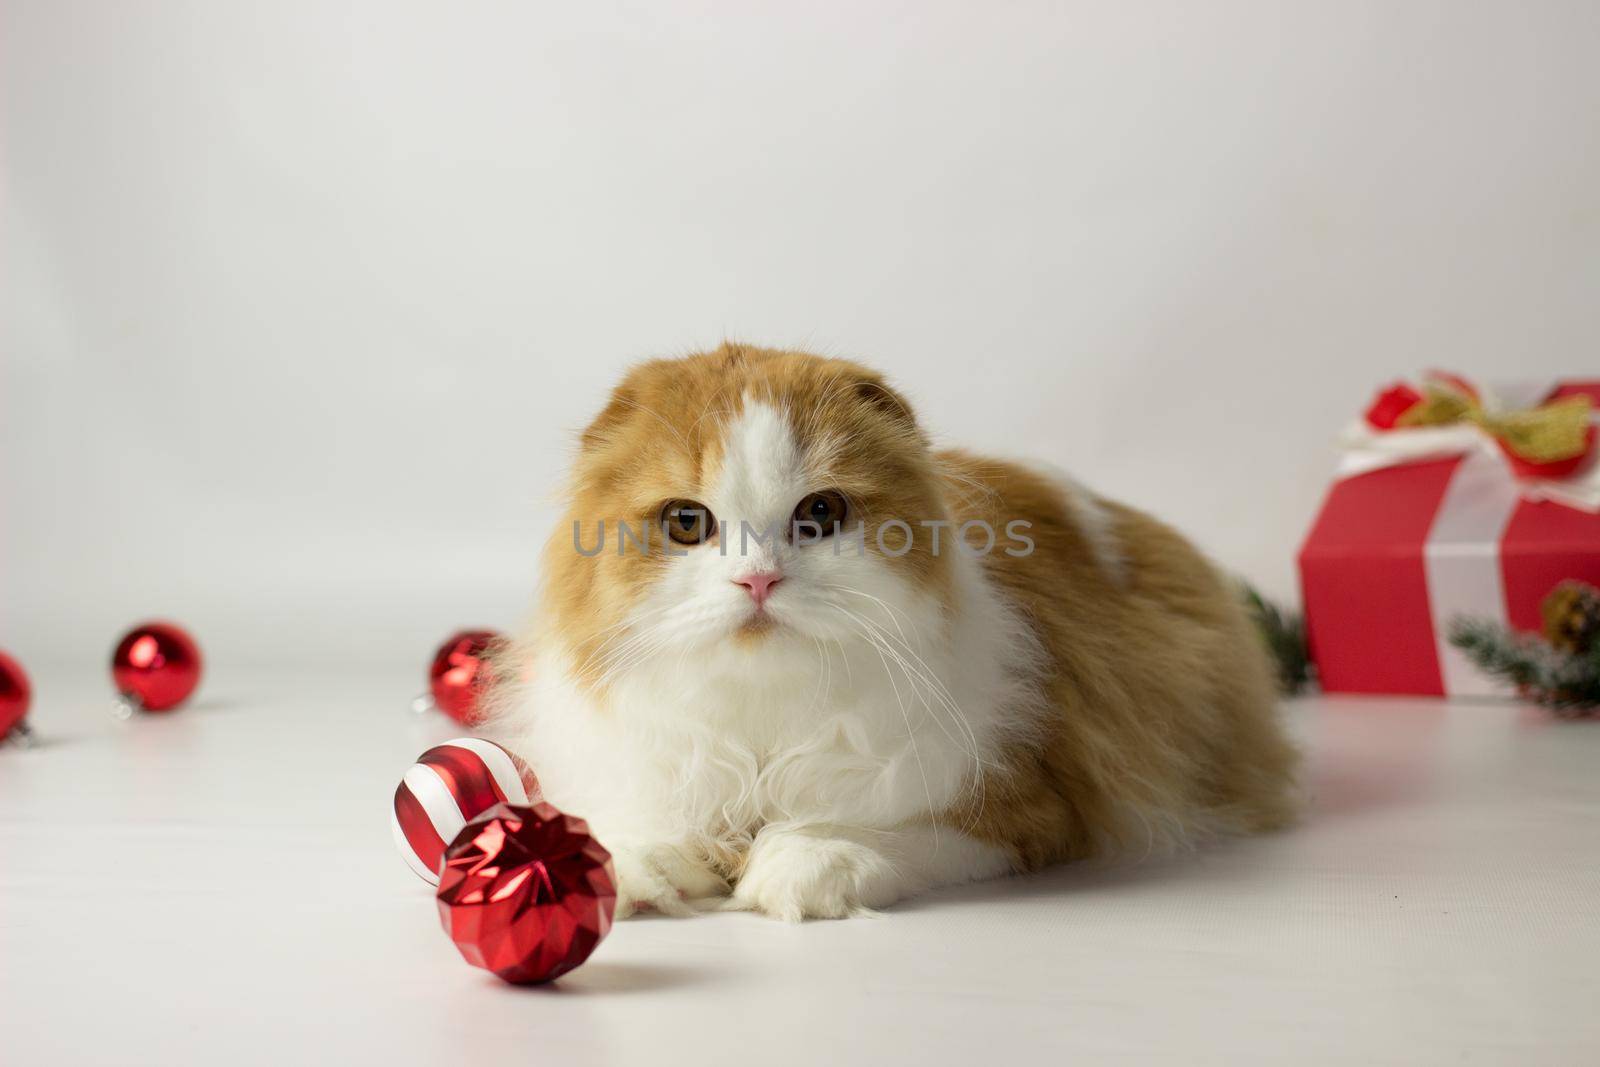 Cute scottish kitten playing in a gift box with Christmas decoration. Highland fold cat. White and red color